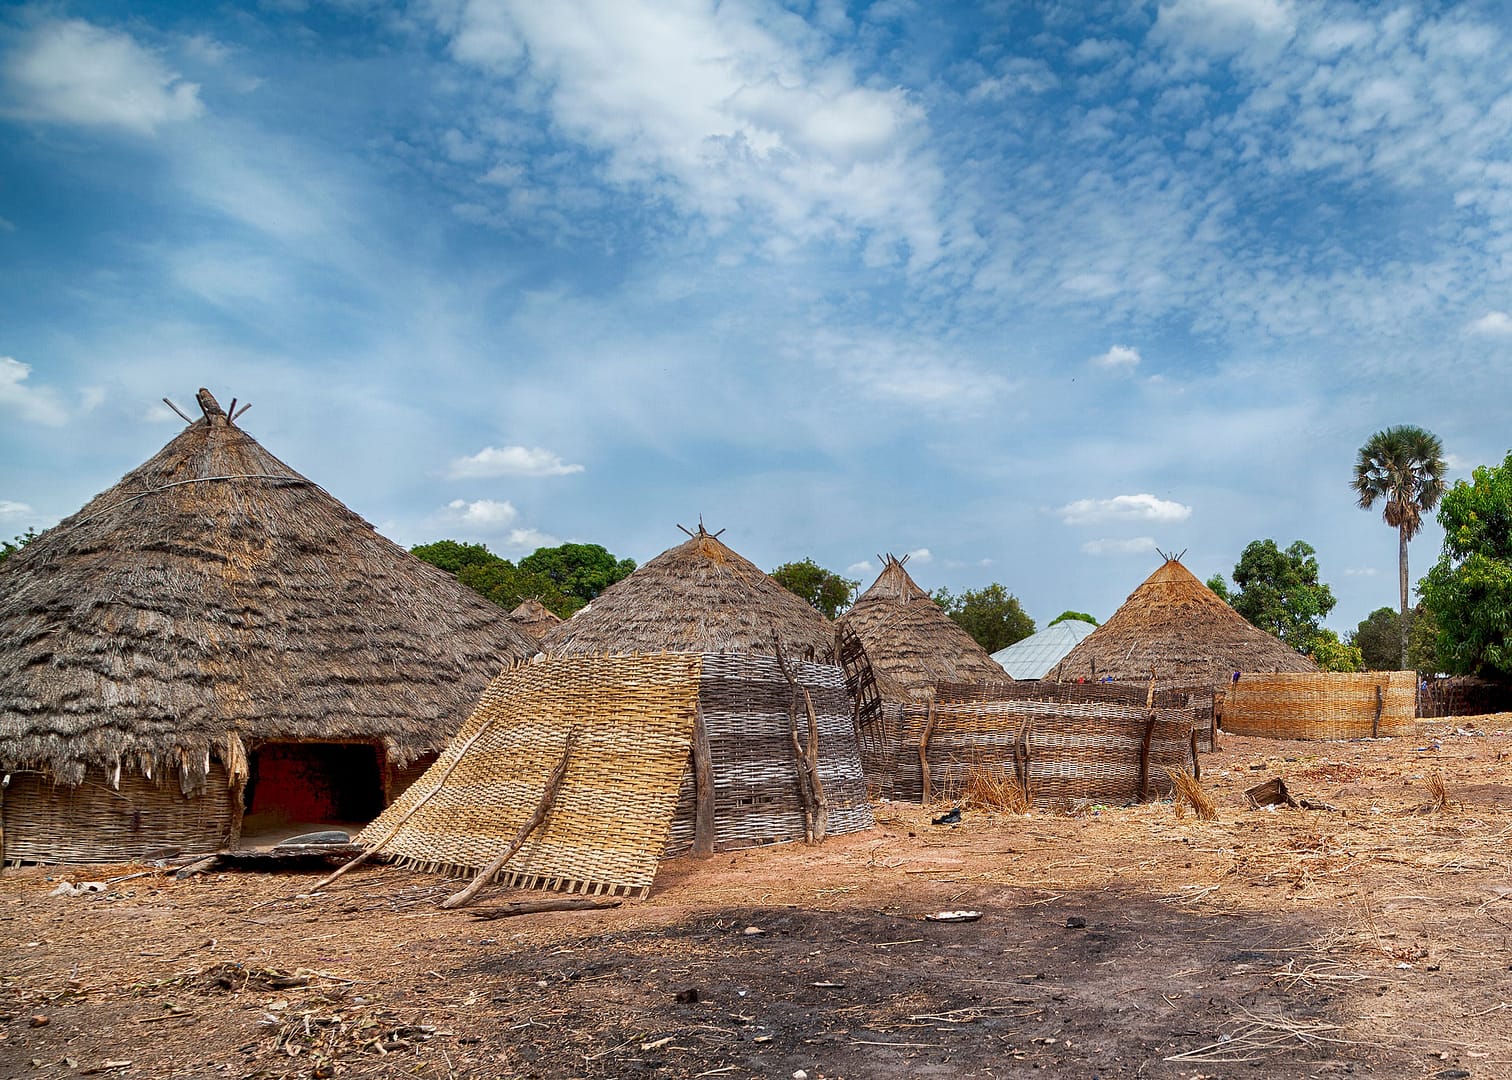 A row of traditional thatched African huts